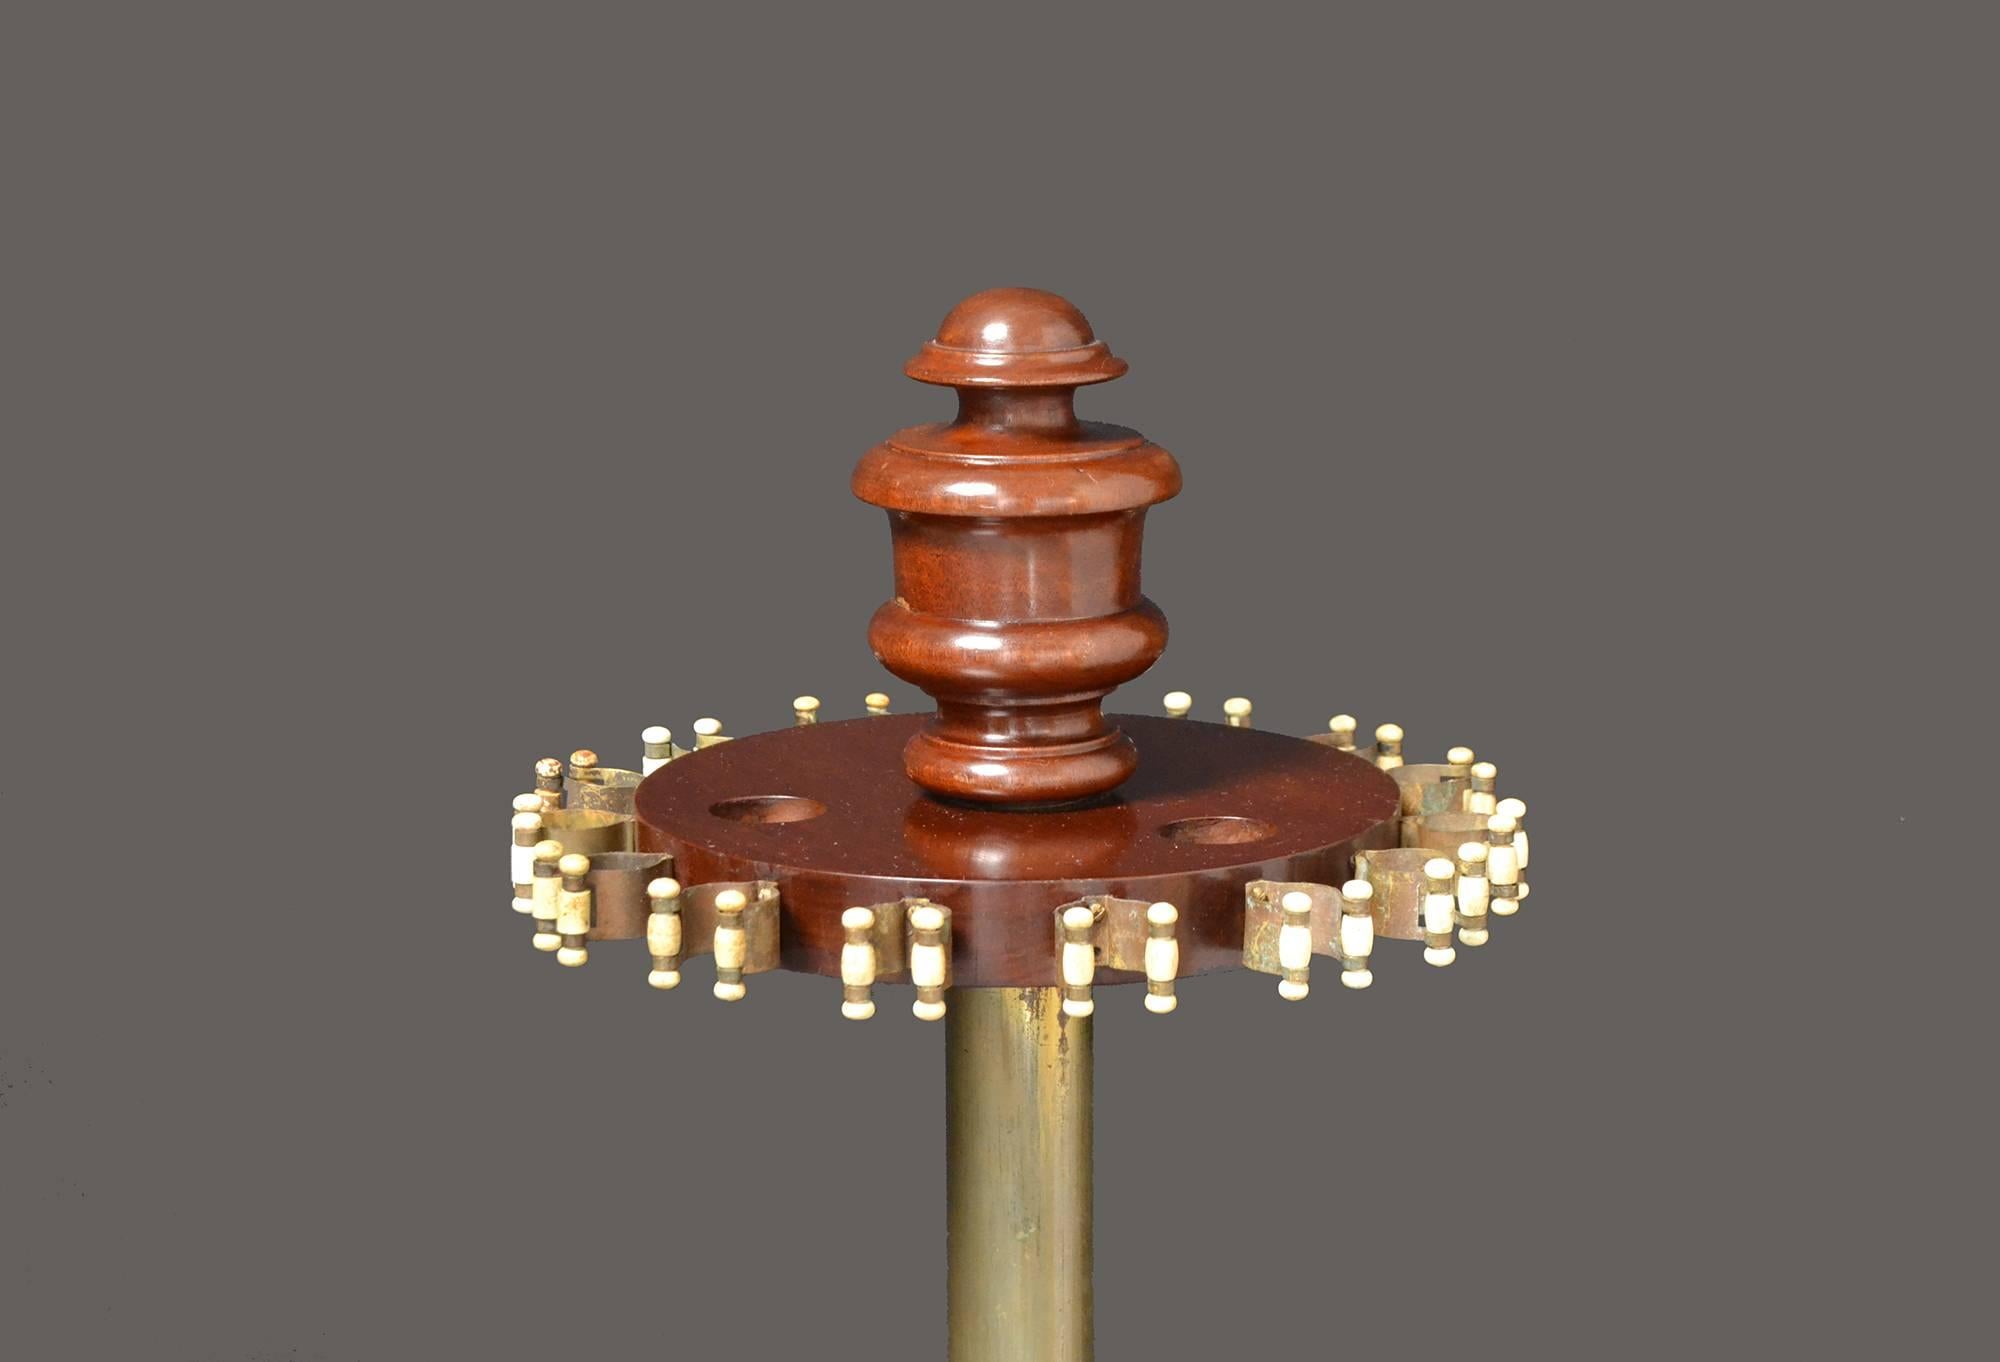 A very good quality mahogany billiard cue stand probably by Thurston of London manufactured, circa 1860.

A central brass upright column supports a circular top with a decorative finial and brass sprung cue clips which hold up to 15 cues, all